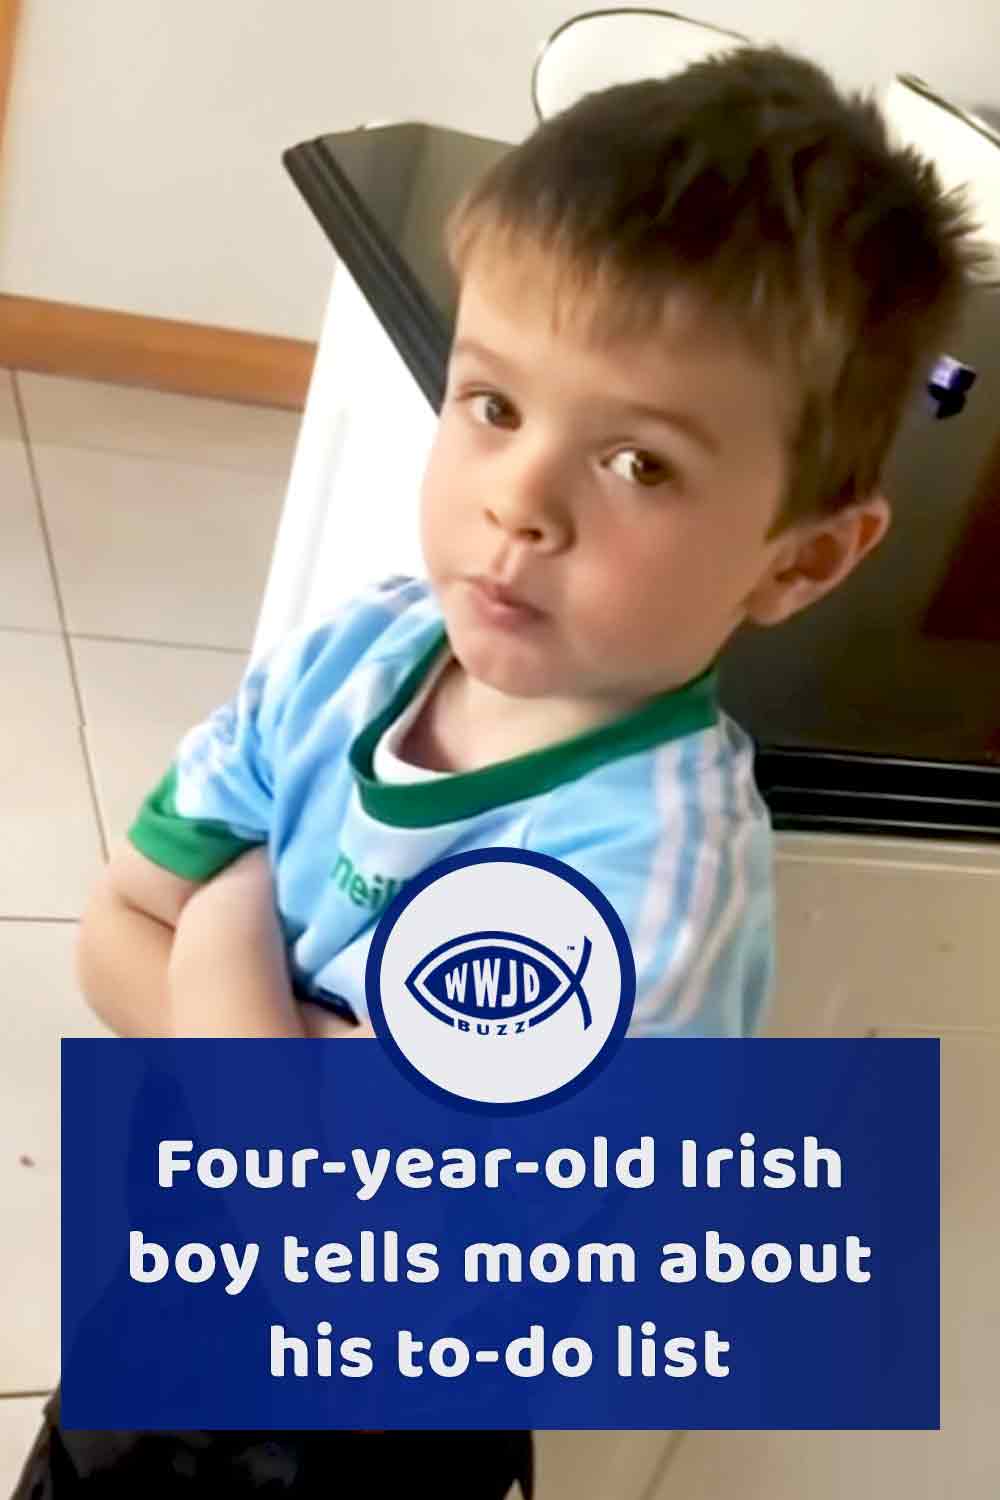 Four-year-old Irish boy tells mom about his to-do list